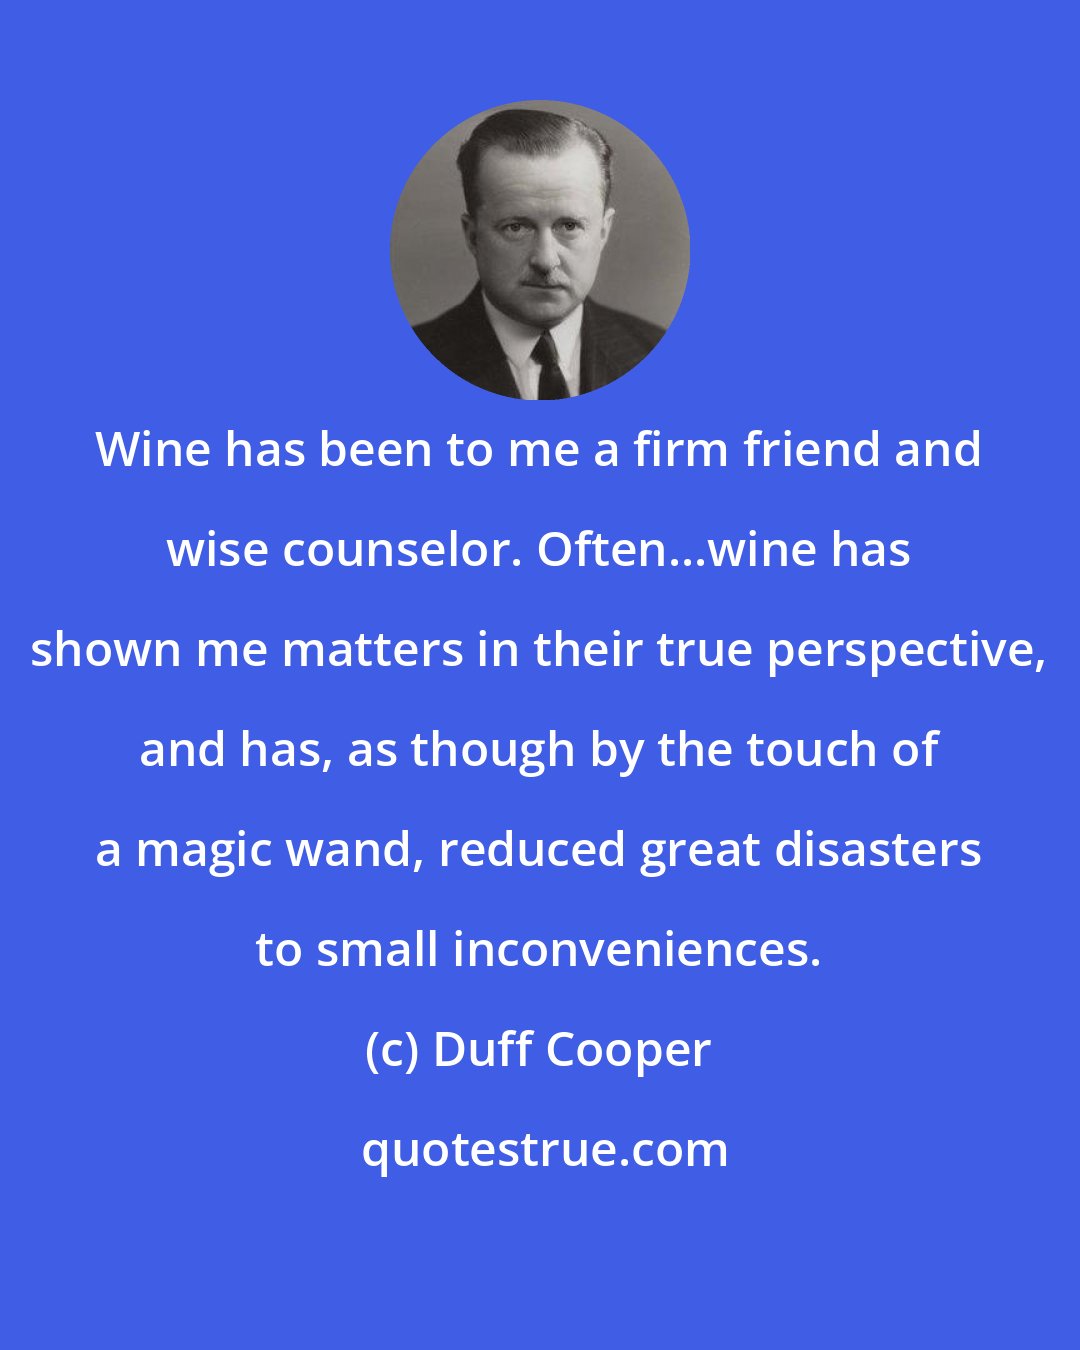 Duff Cooper: Wine has been to me a firm friend and wise counselor. Often...wine has shown me matters in their true perspective, and has, as though by the touch of a magic wand, reduced great disasters to small inconveniences.